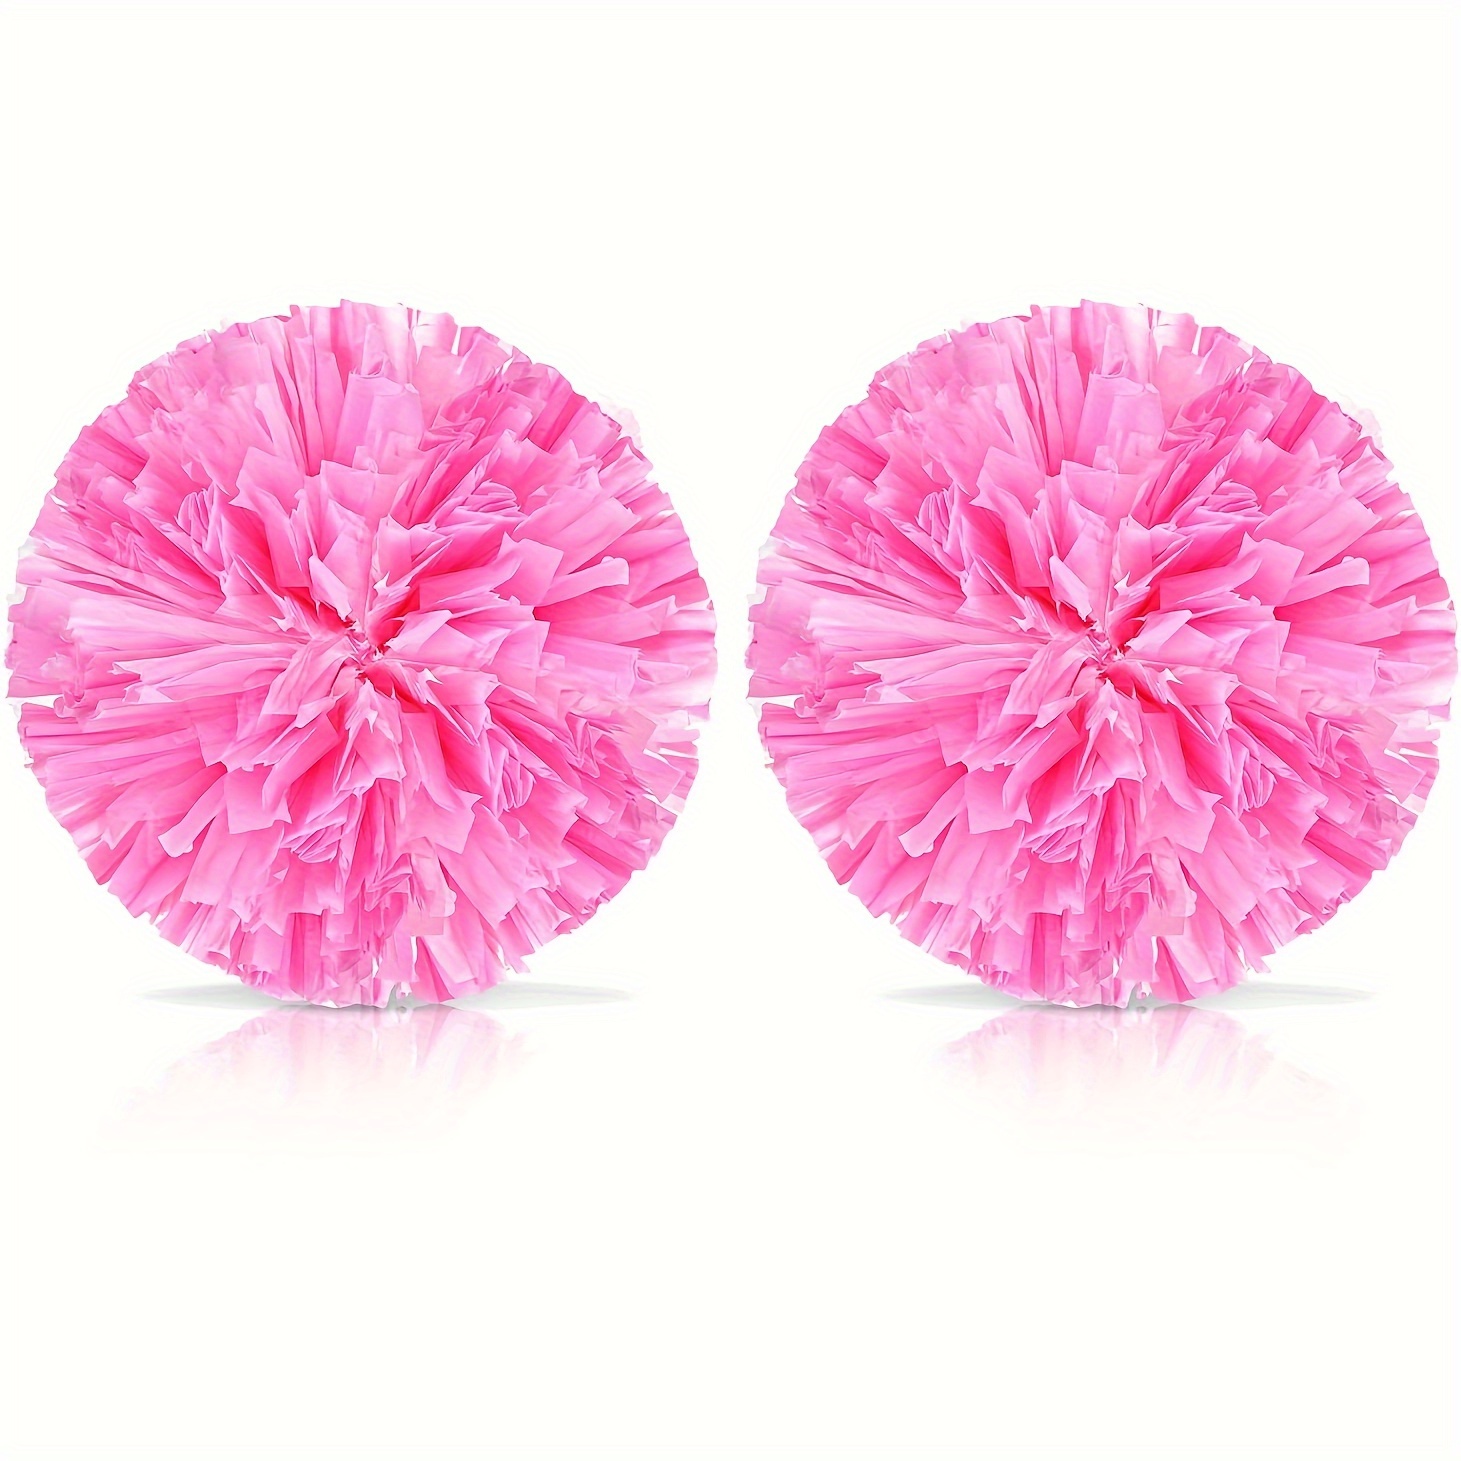 

2pcs, Cheerleader Pom Pom Balls, Suitable For Dancing Sports Games